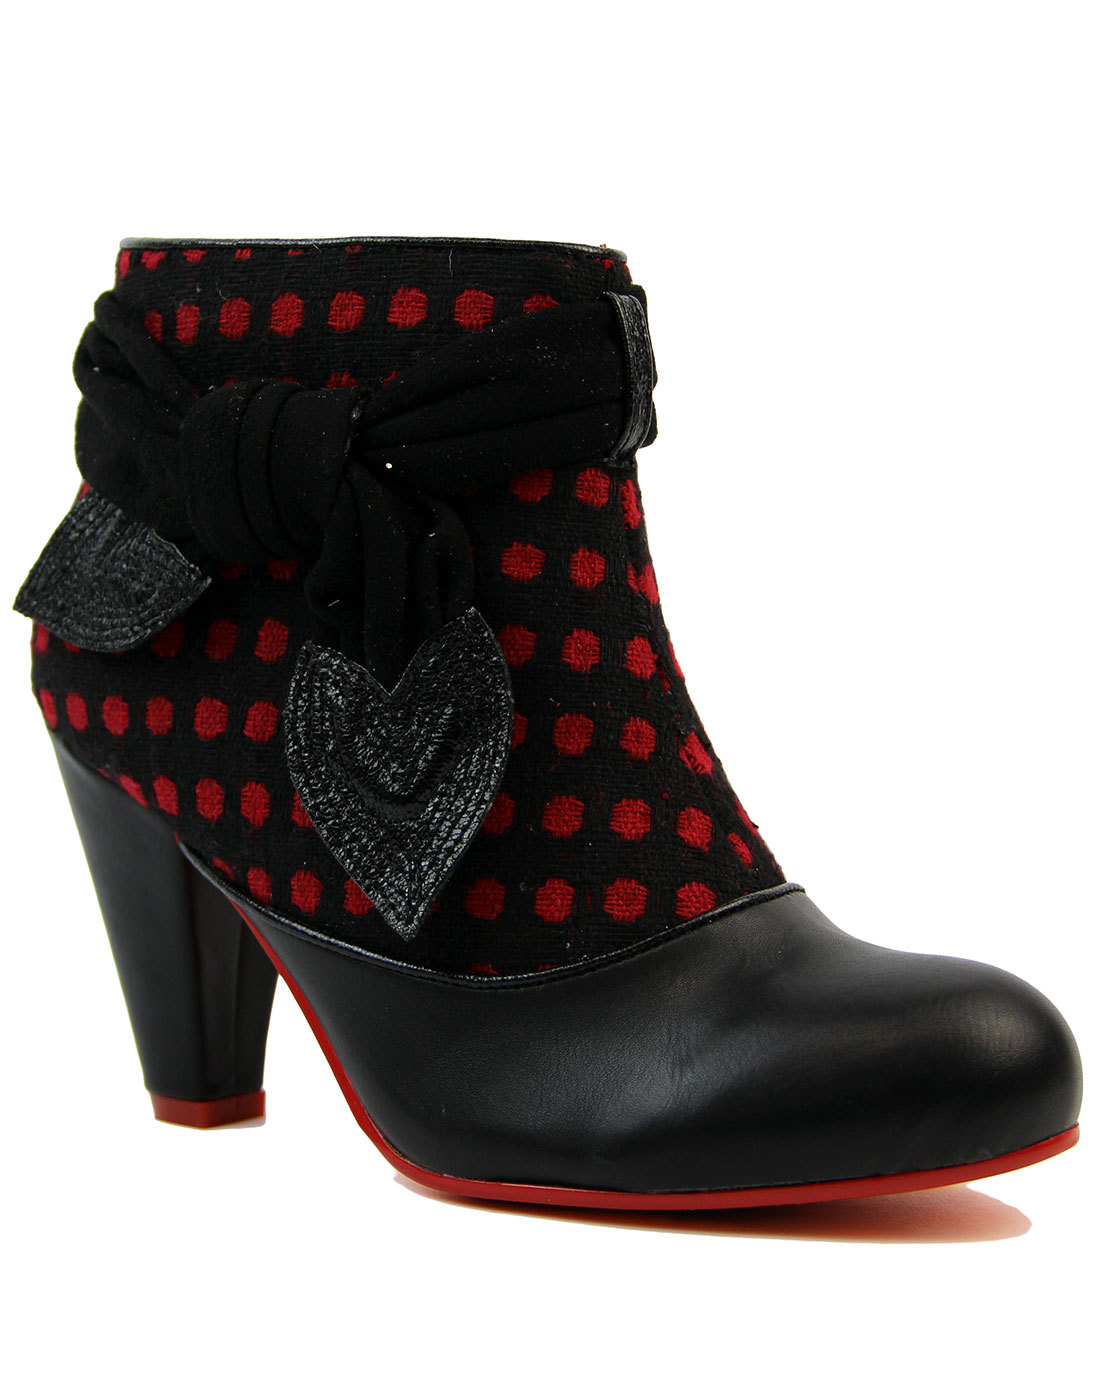 Sidewalk POETIC LICENCE Retro Mod Ankle Boots